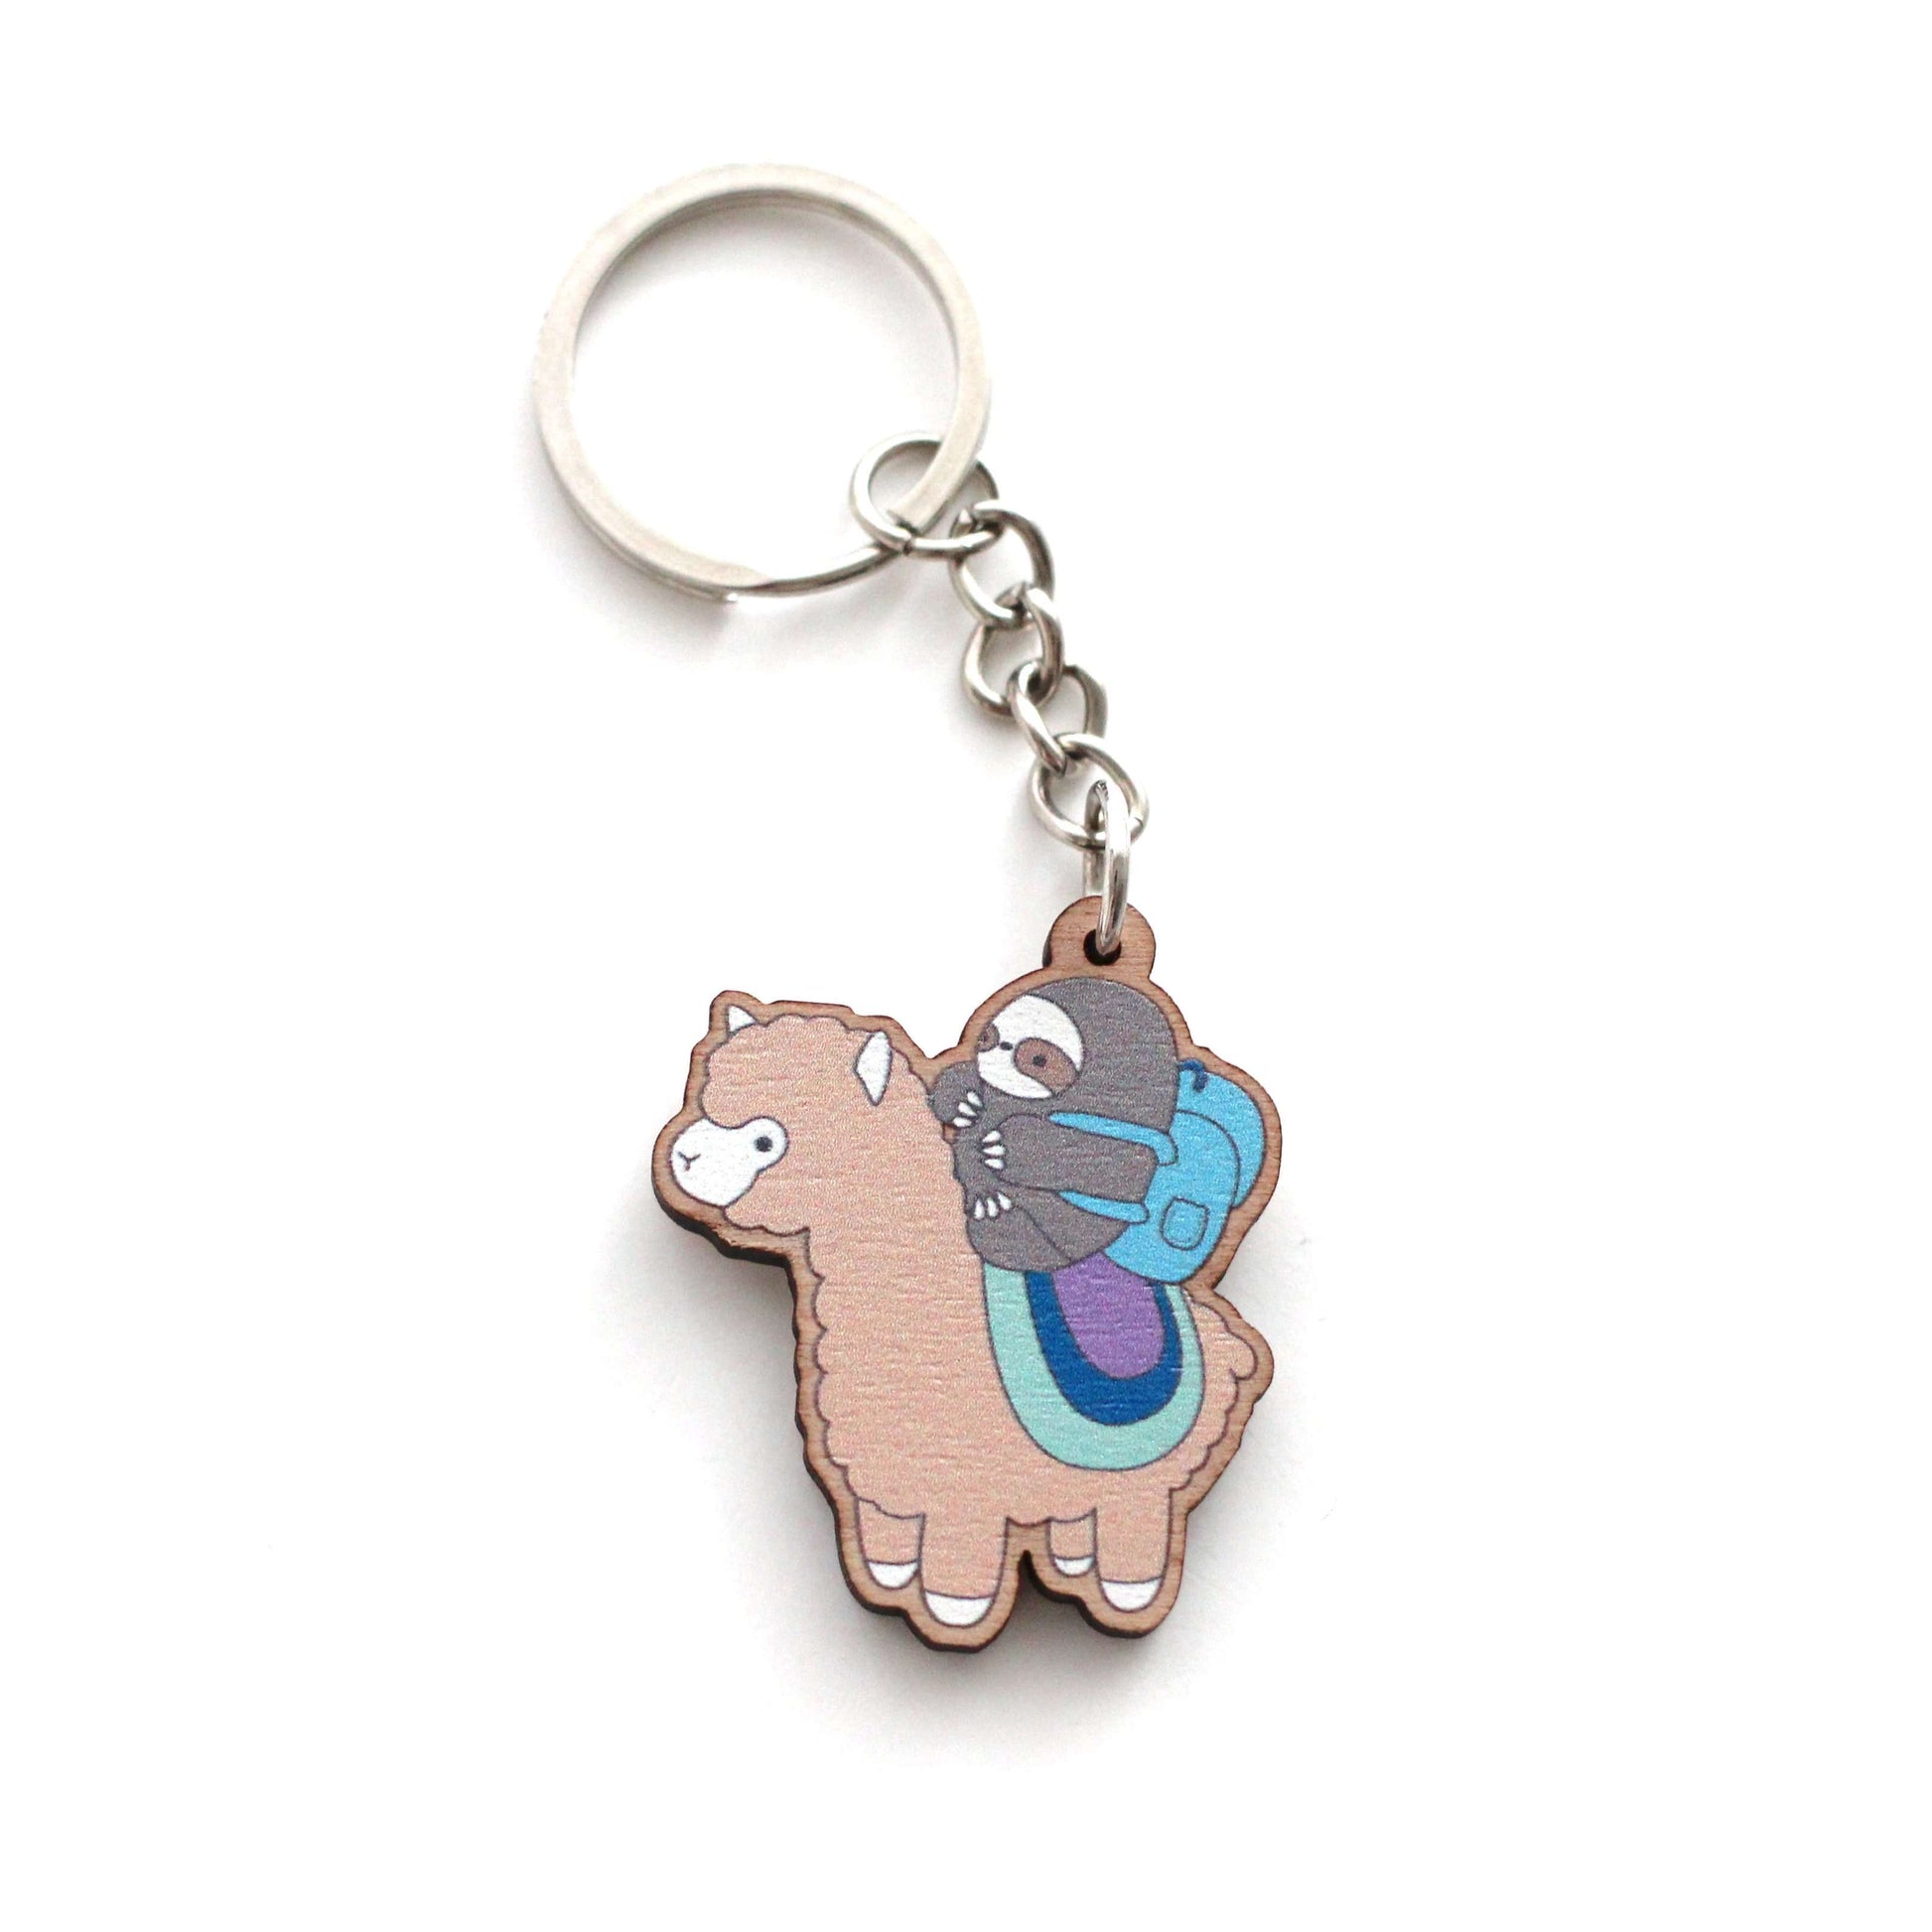 Sloth and Alpaca Adventurer Wooden Keychain (Brown) - Sustainable Gift - Llama Gift by Wild Whimsy Woolies